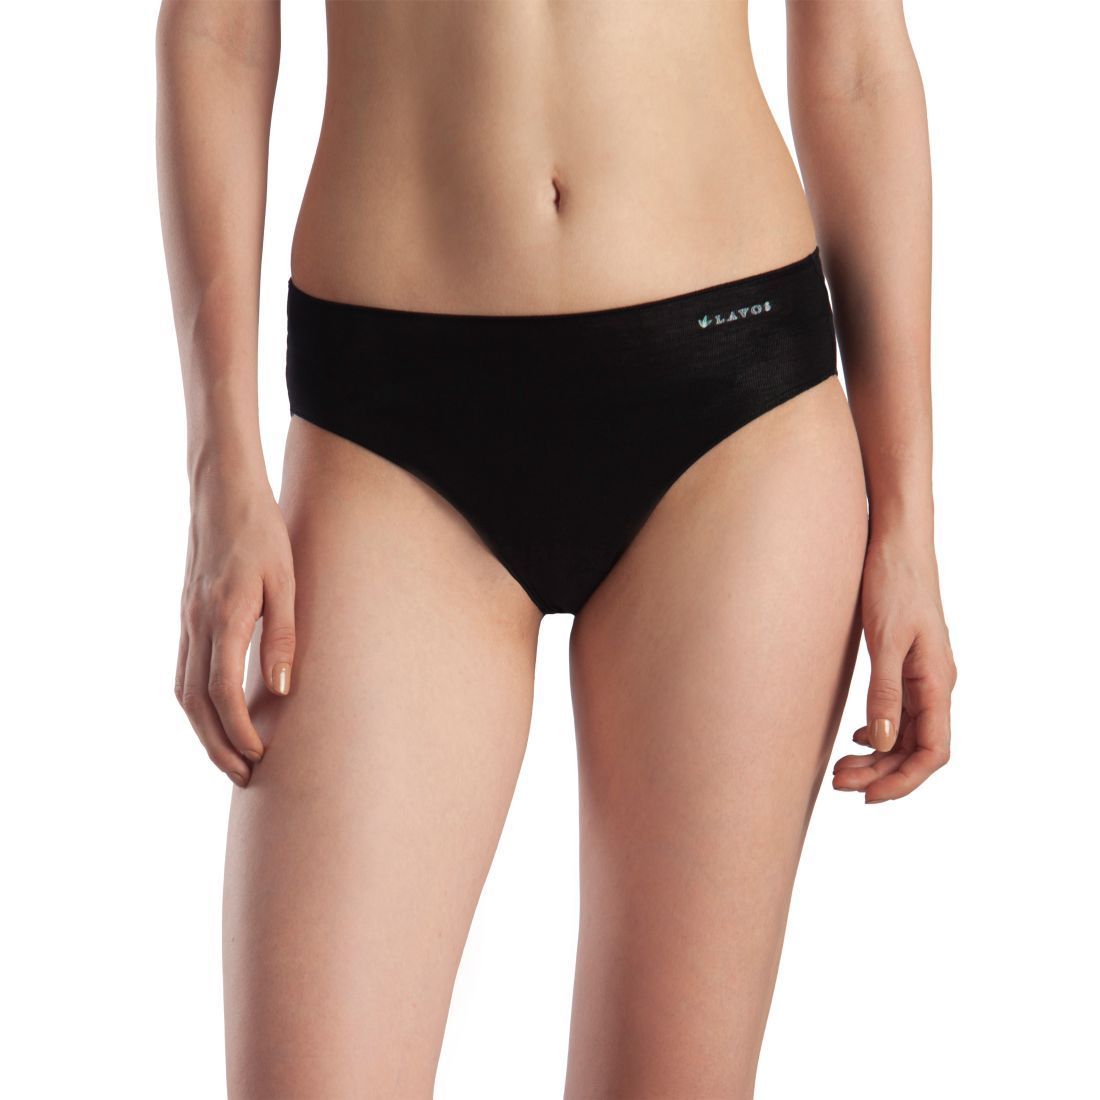 Organic Bamboo No Marks Panty for Women - No line Panty without lines|  Cotton Underwear No line| Invisible Panty Line